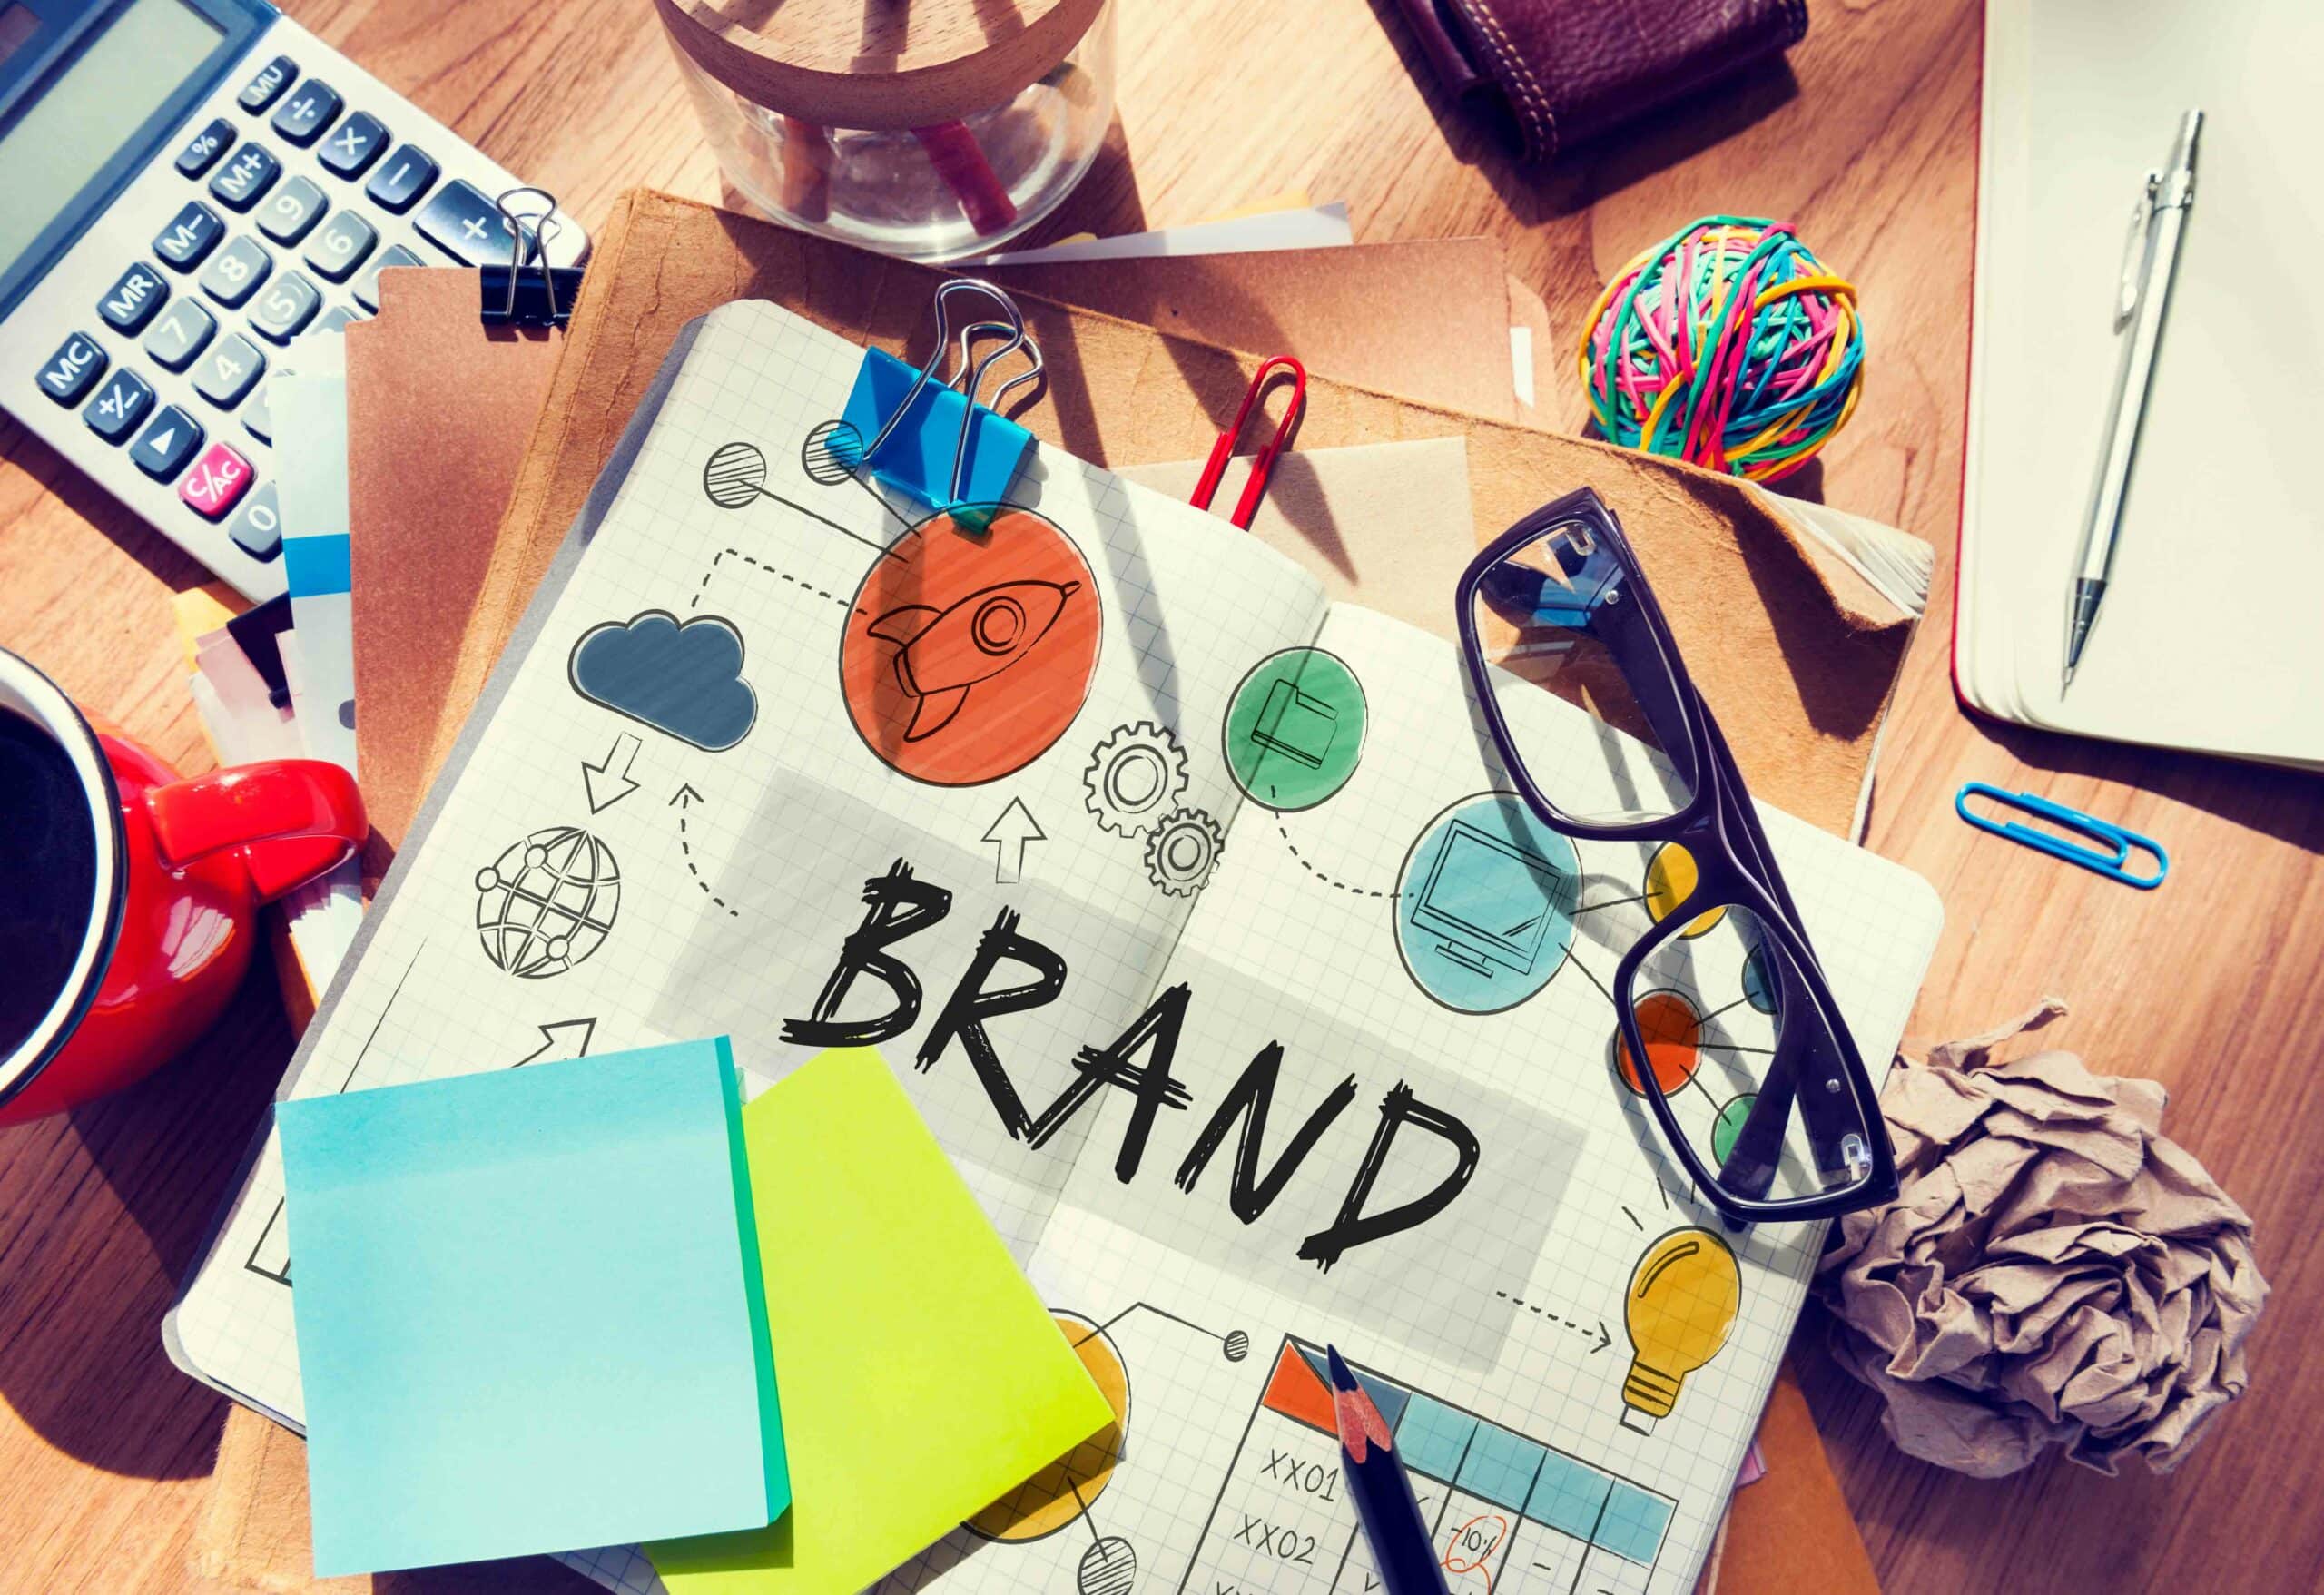 What is the Brand Protection?